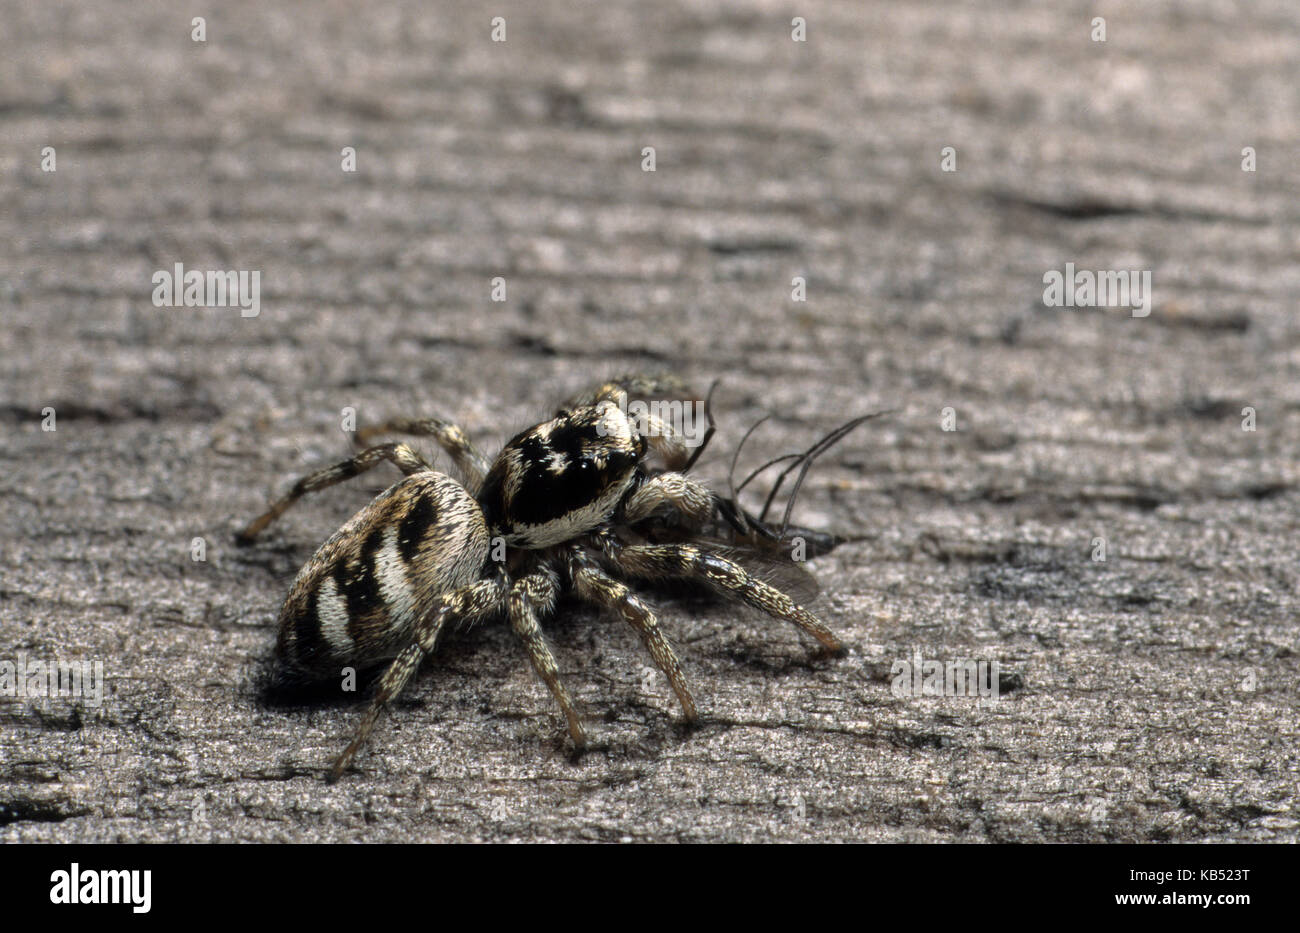 Zebra Jumping Spider (Salticus scenicus) with prey it has captured Stock Photo